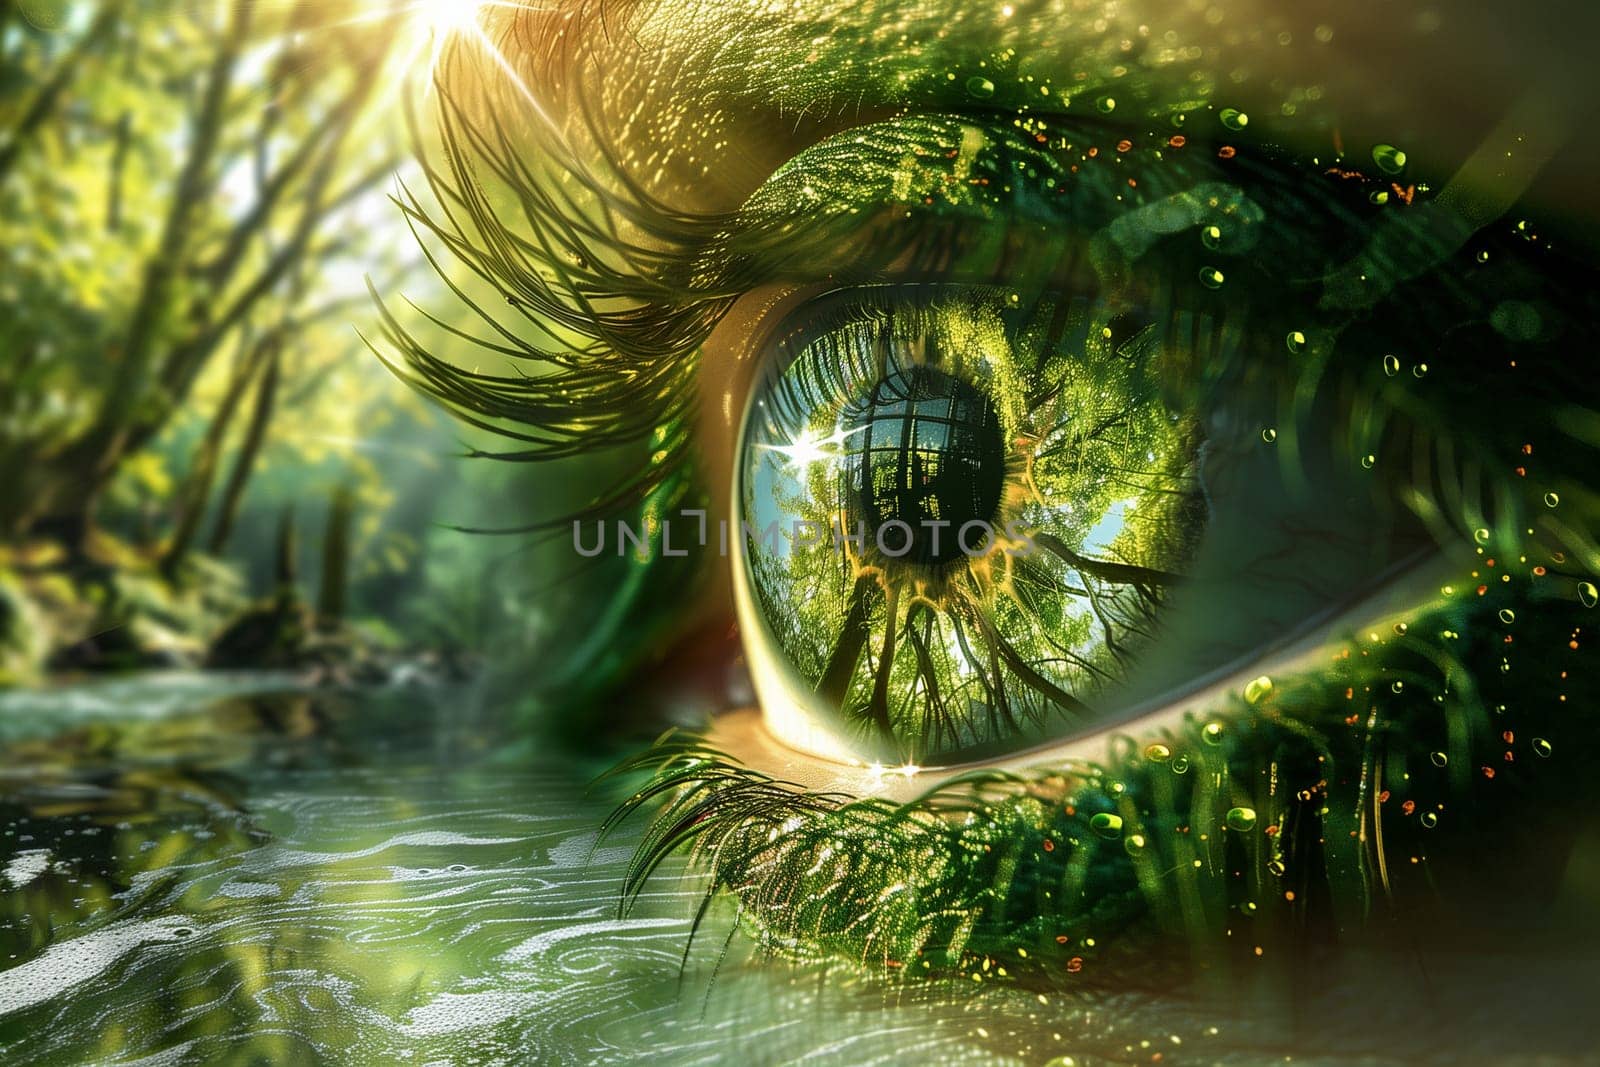 A highly detailed close-up features an eye reflecting a lush green forest under bright daylight, evoking a strong connection with nature.